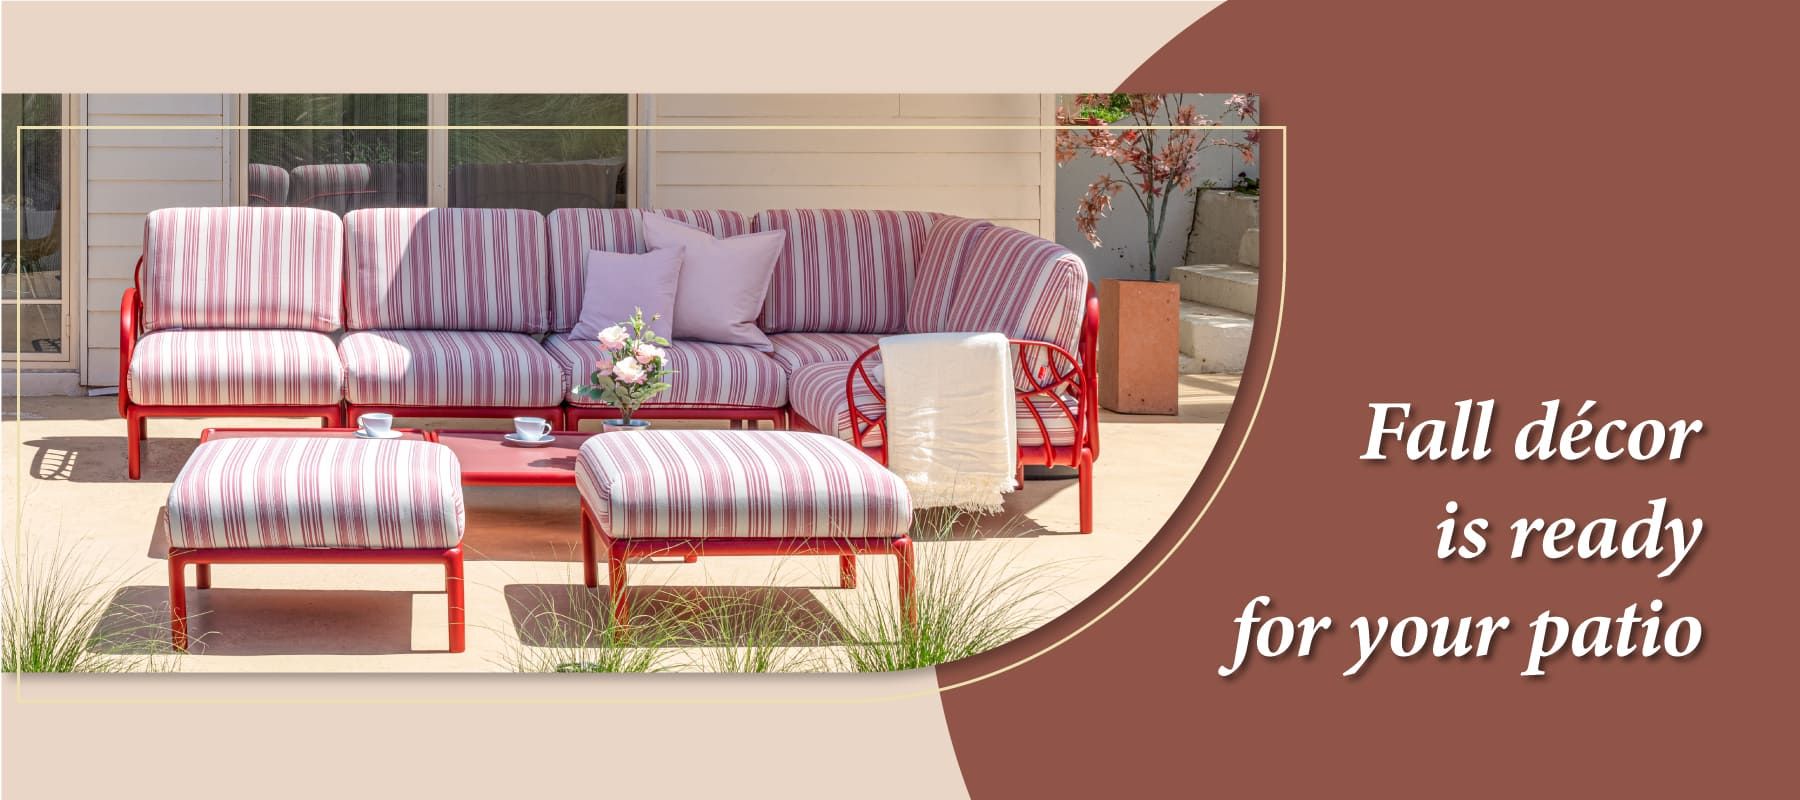 Lagoon-wed-banner_USA_72151 Outdoor Furniture | Composite Patio & Outdoor Furniture - Lagoon